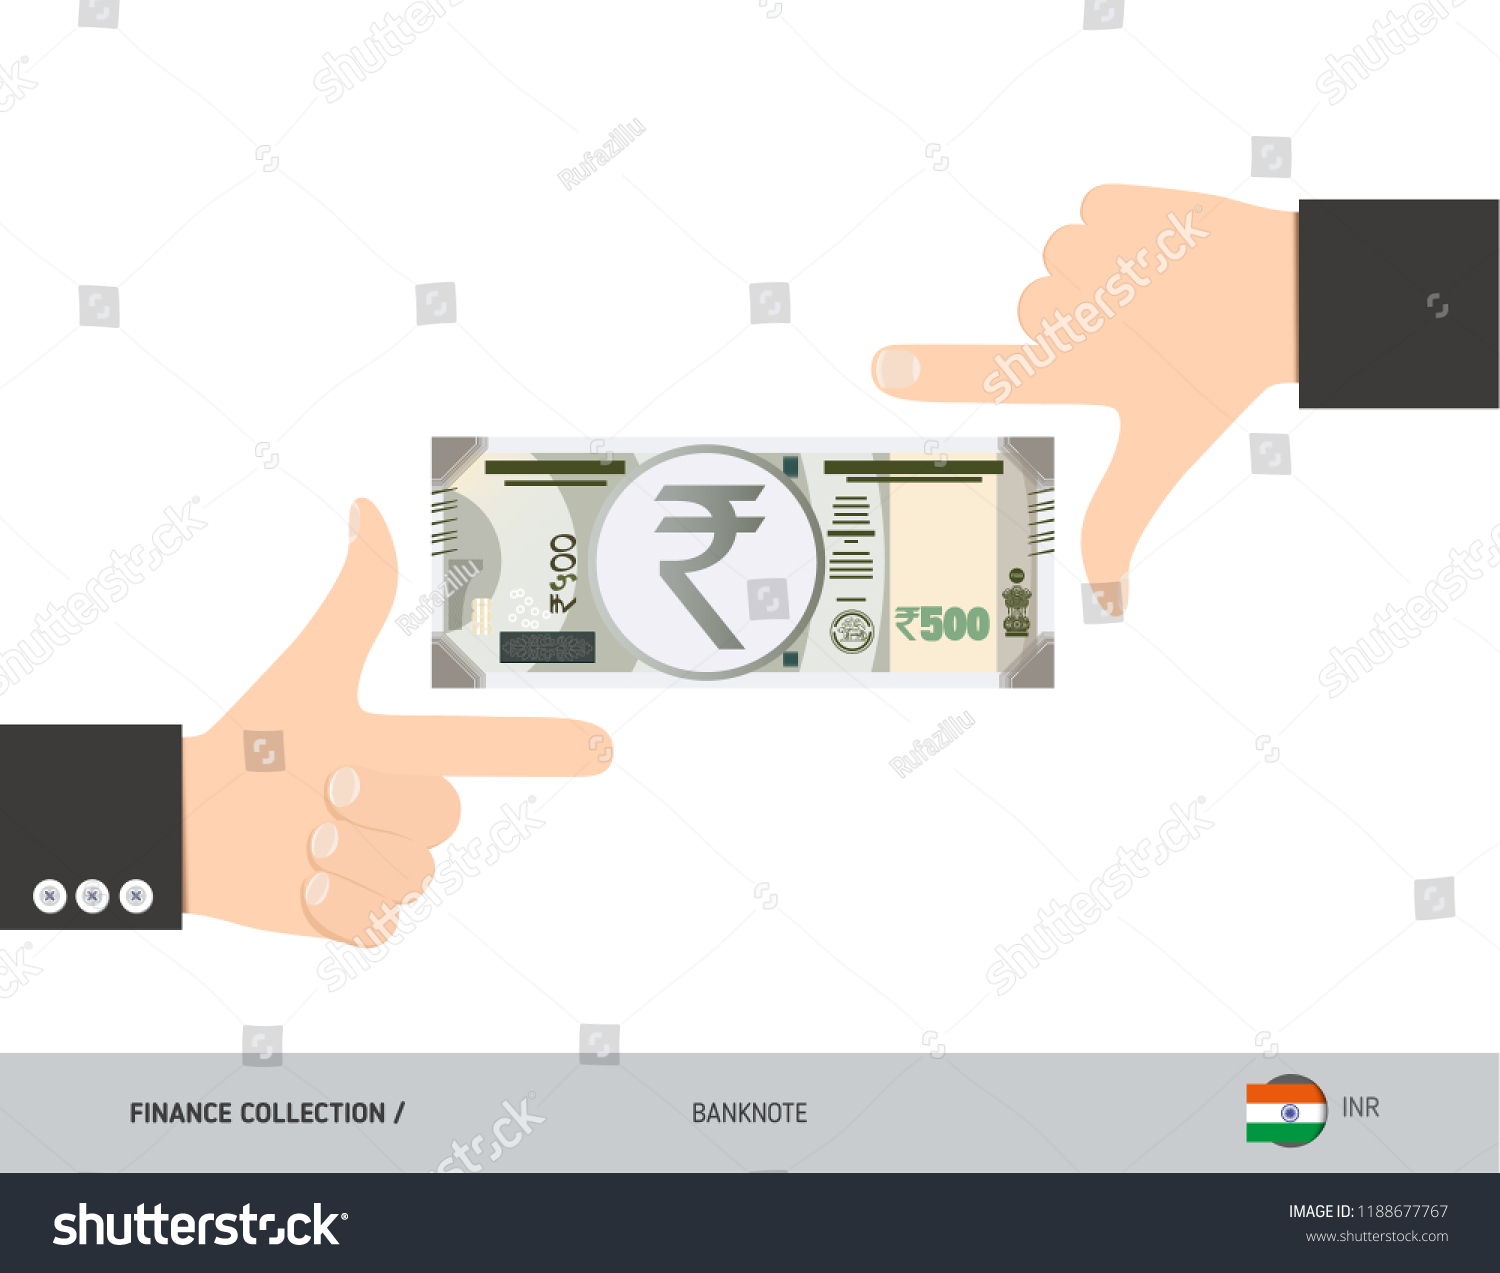 500 Indian Rupee Banknote. Business hands measuring banknote. Flat style vector illustration. Business finance concept. #1188677767